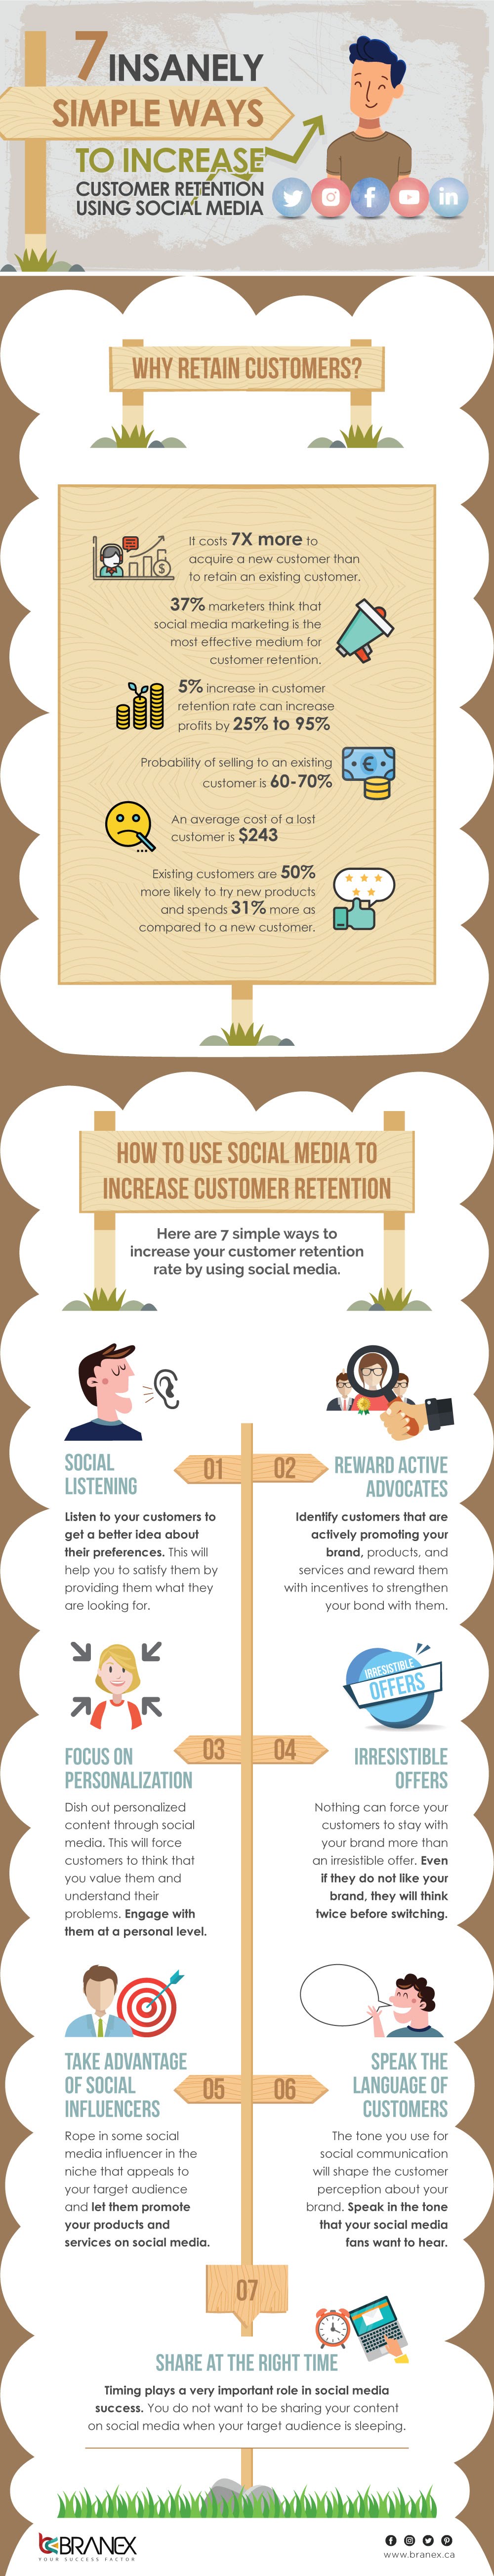 Infographic: 7 Super Simple Ways to Increase Customer Retention Using Social Media